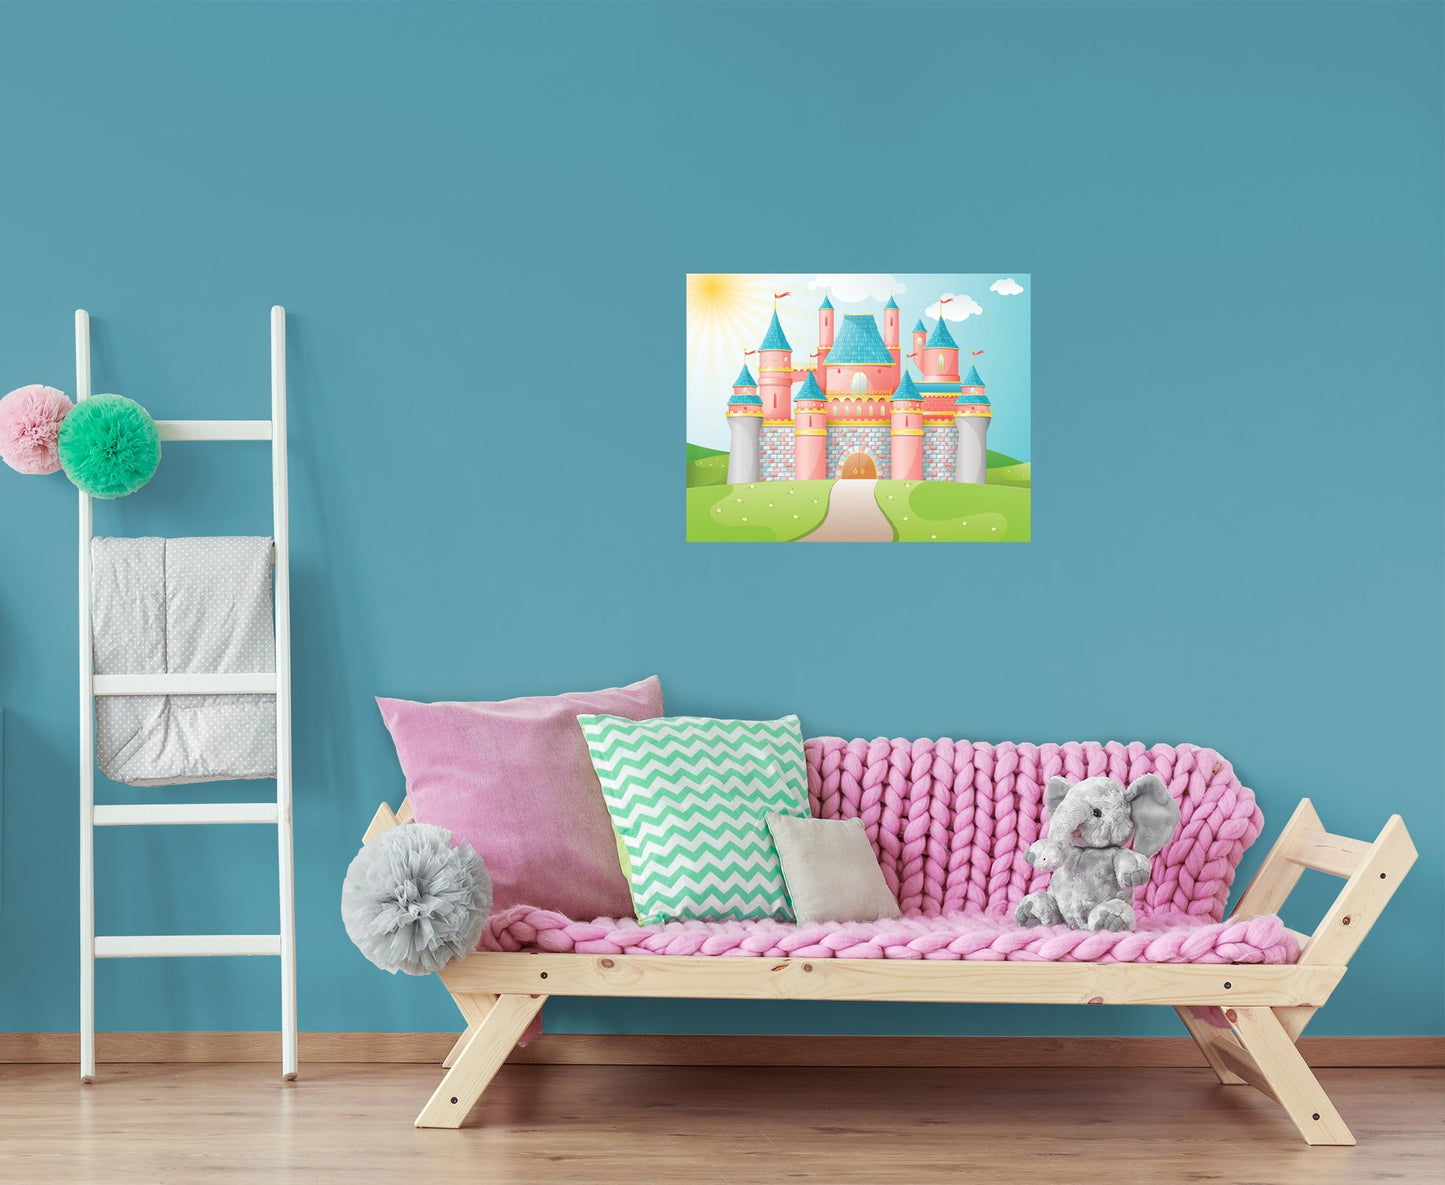 Nursery Princess:  Castle Part 2 Mural        -   Removable Wall   Adhesive Decal